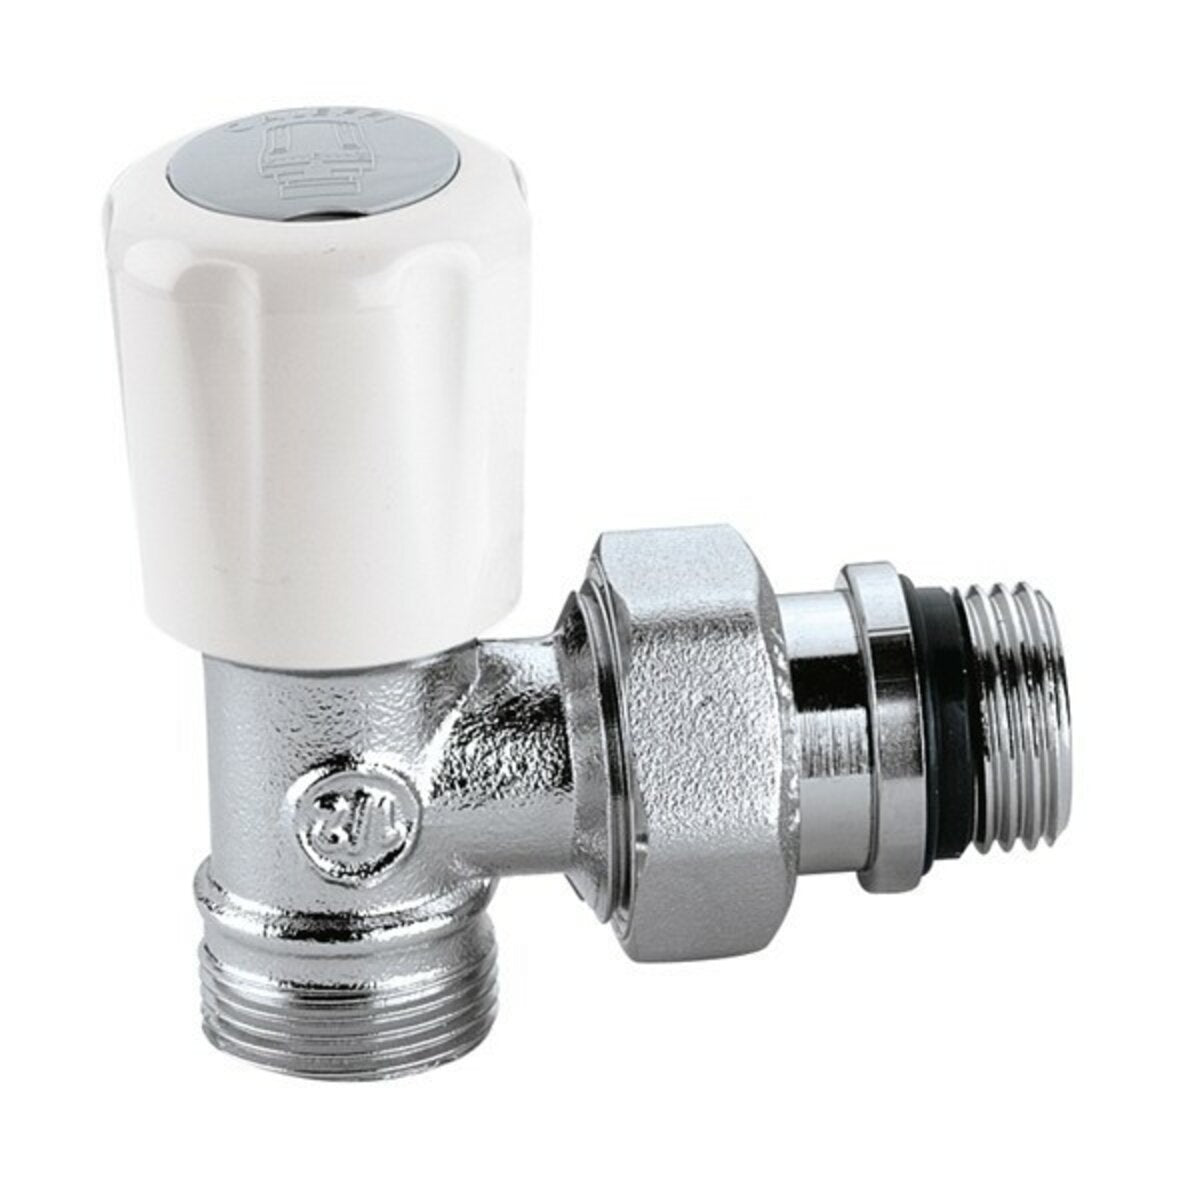 Caleffi angle valve with thermostatic option series 338 3/8 connections for radiators